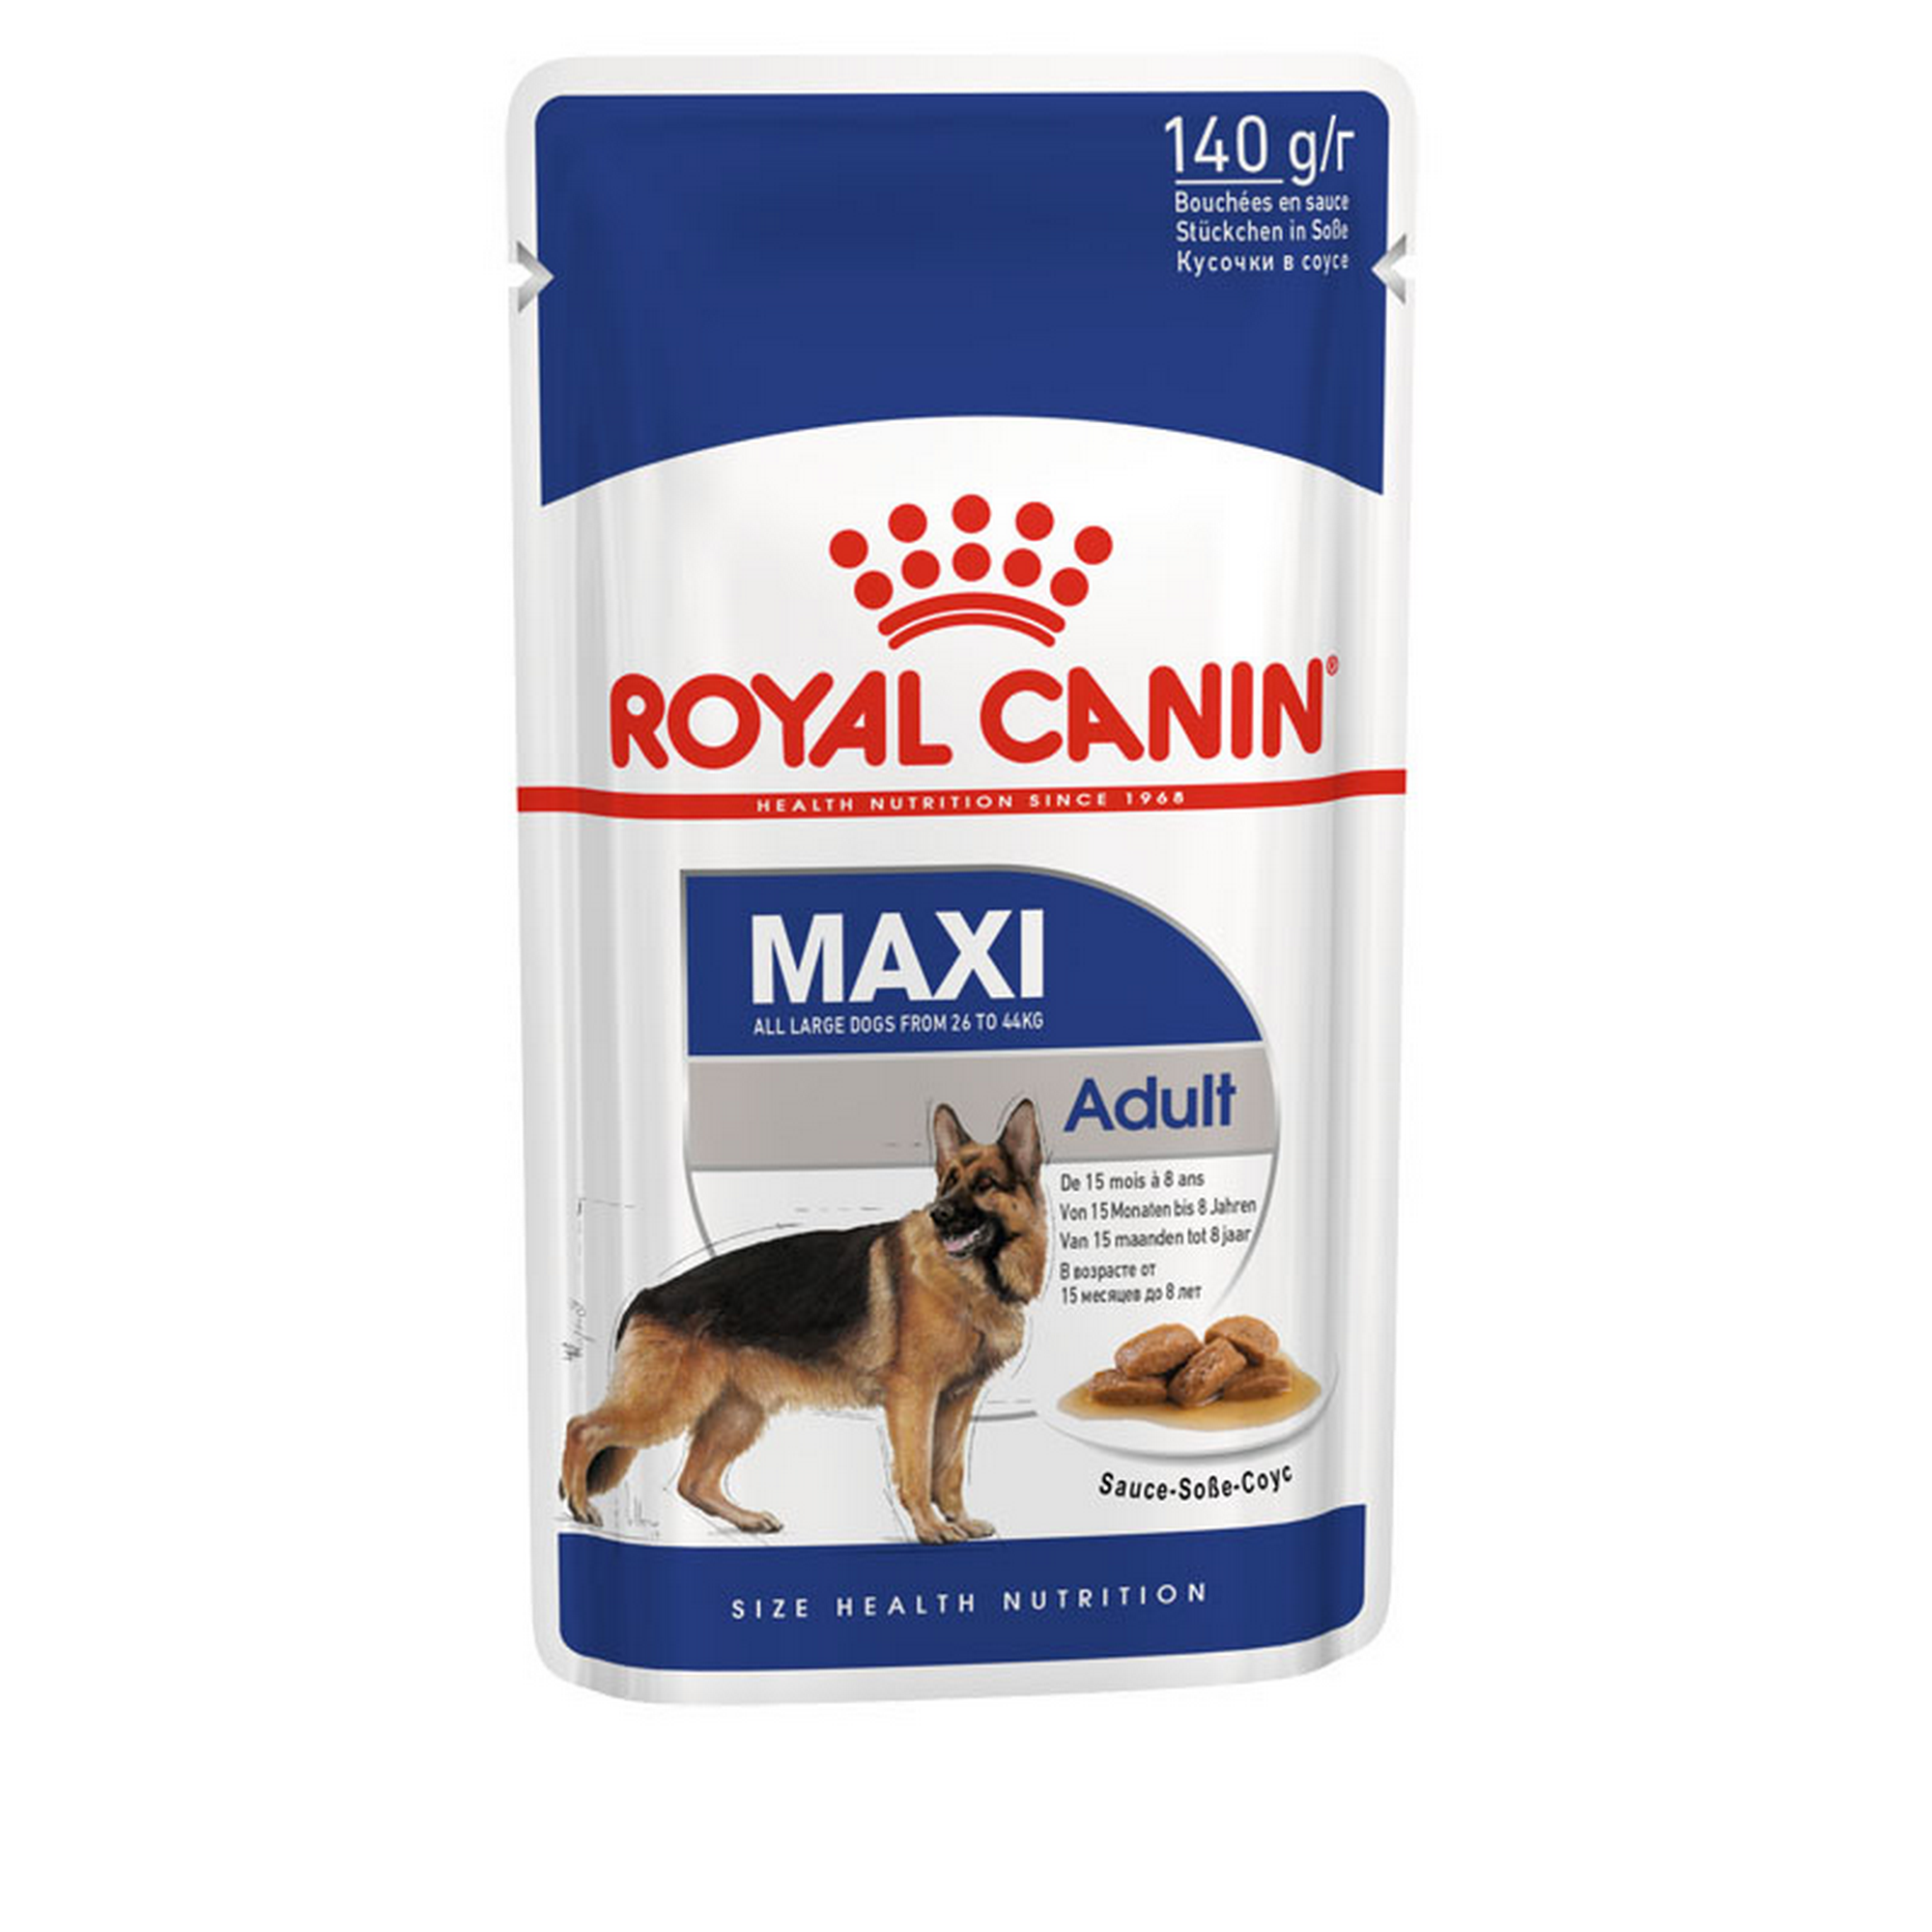 ROYAL CANIN MAXI ADULT Nassfutter für große Hunde + product picture